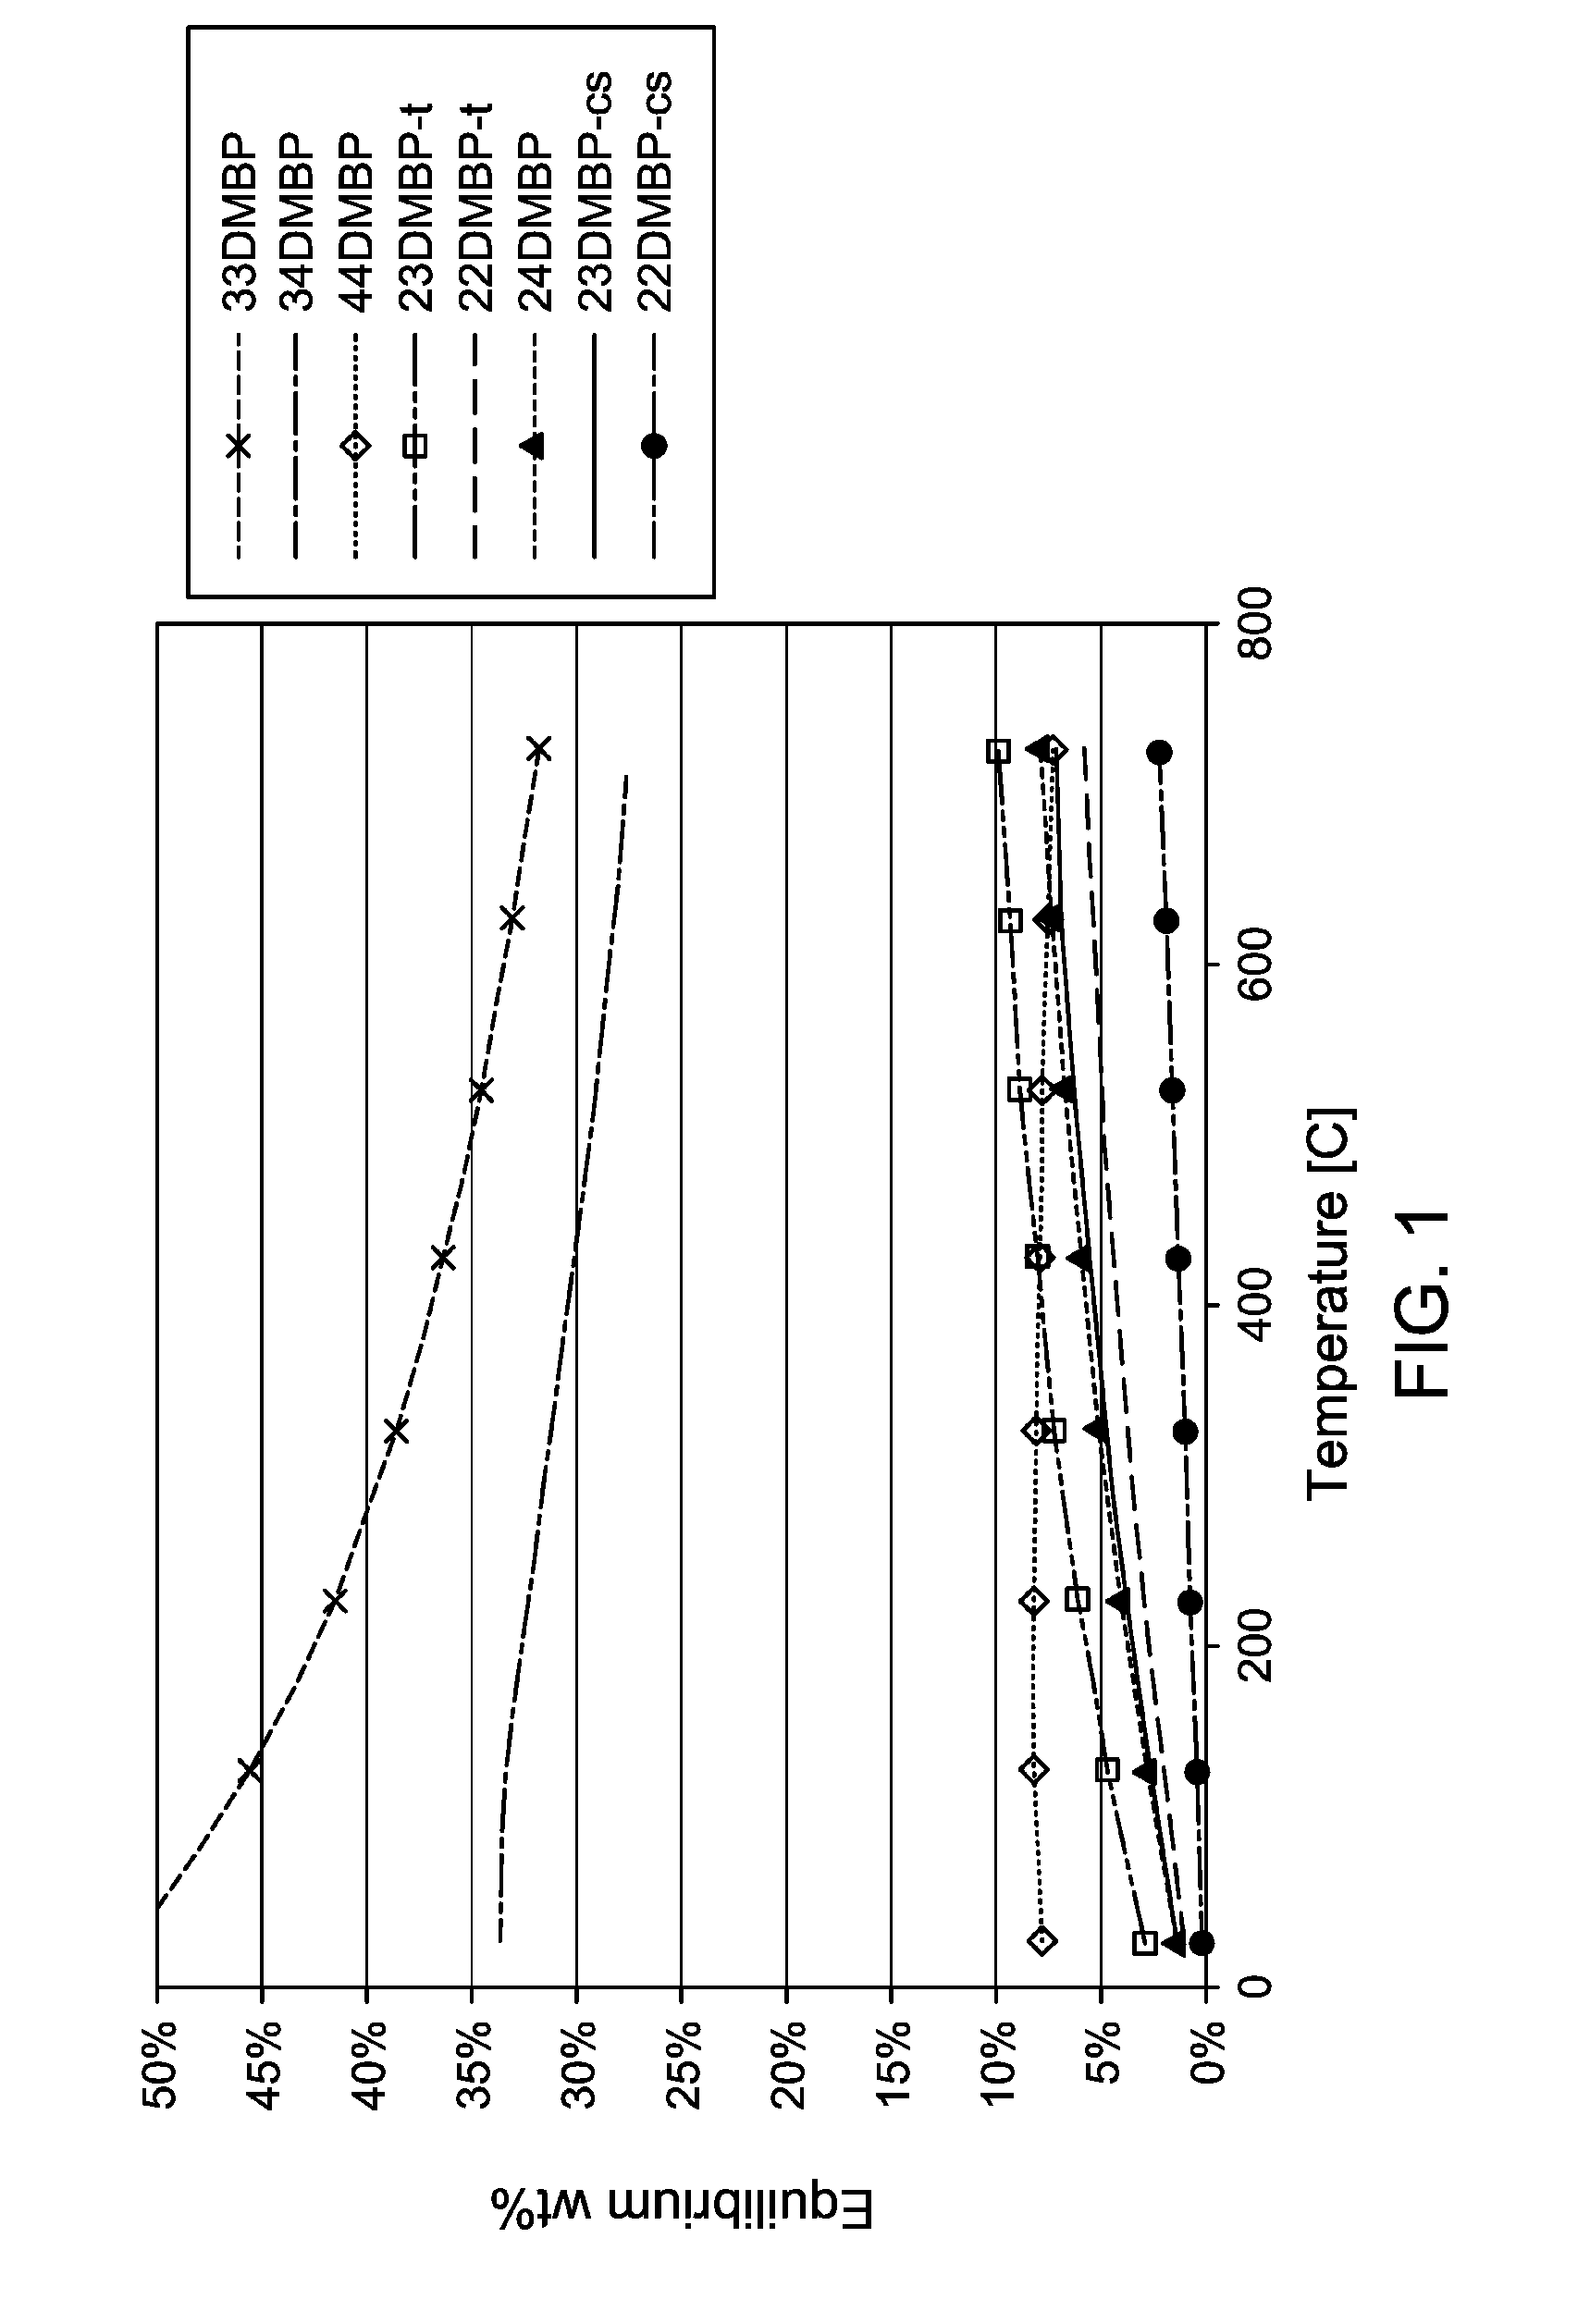 Production and Use of Dialkylbiphenyl Isomer Mixtures